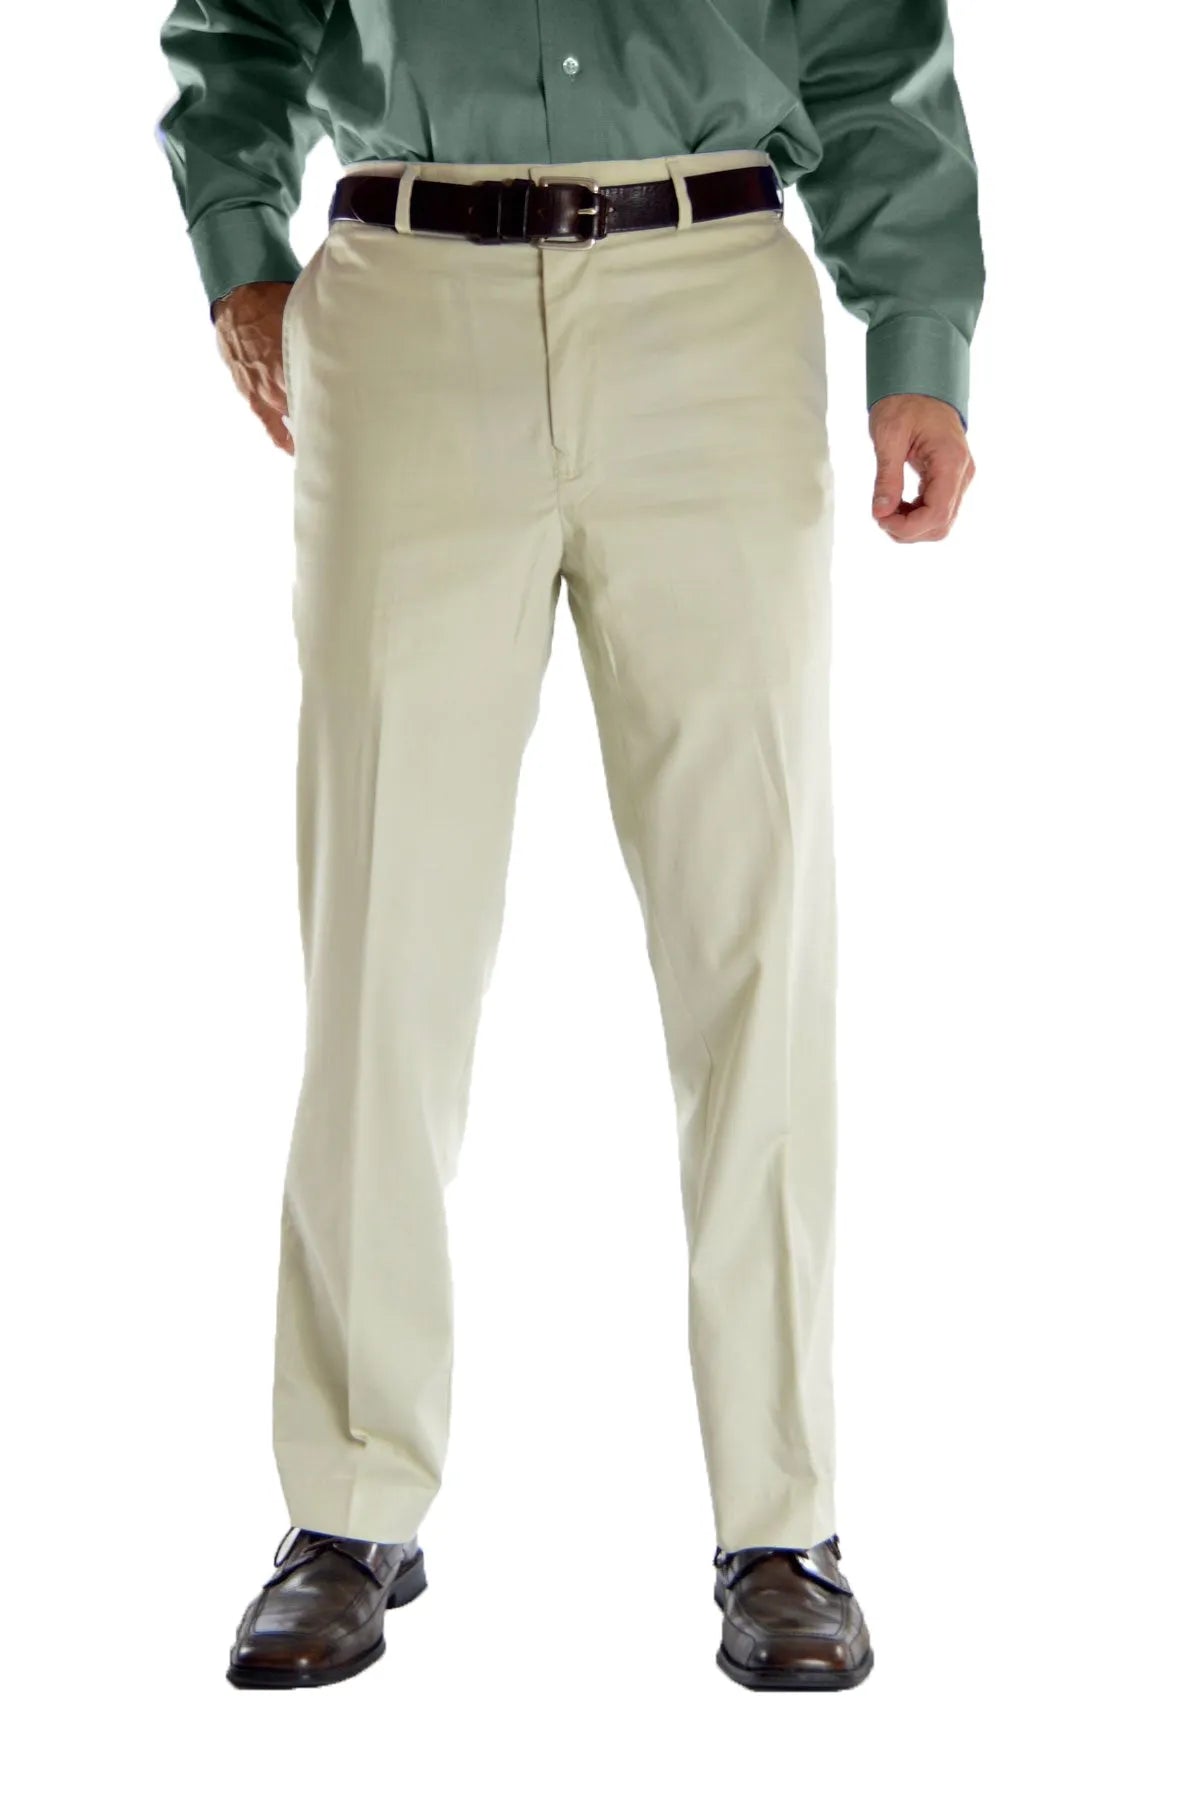 Thomson Twill Pants  All American Clothing Co